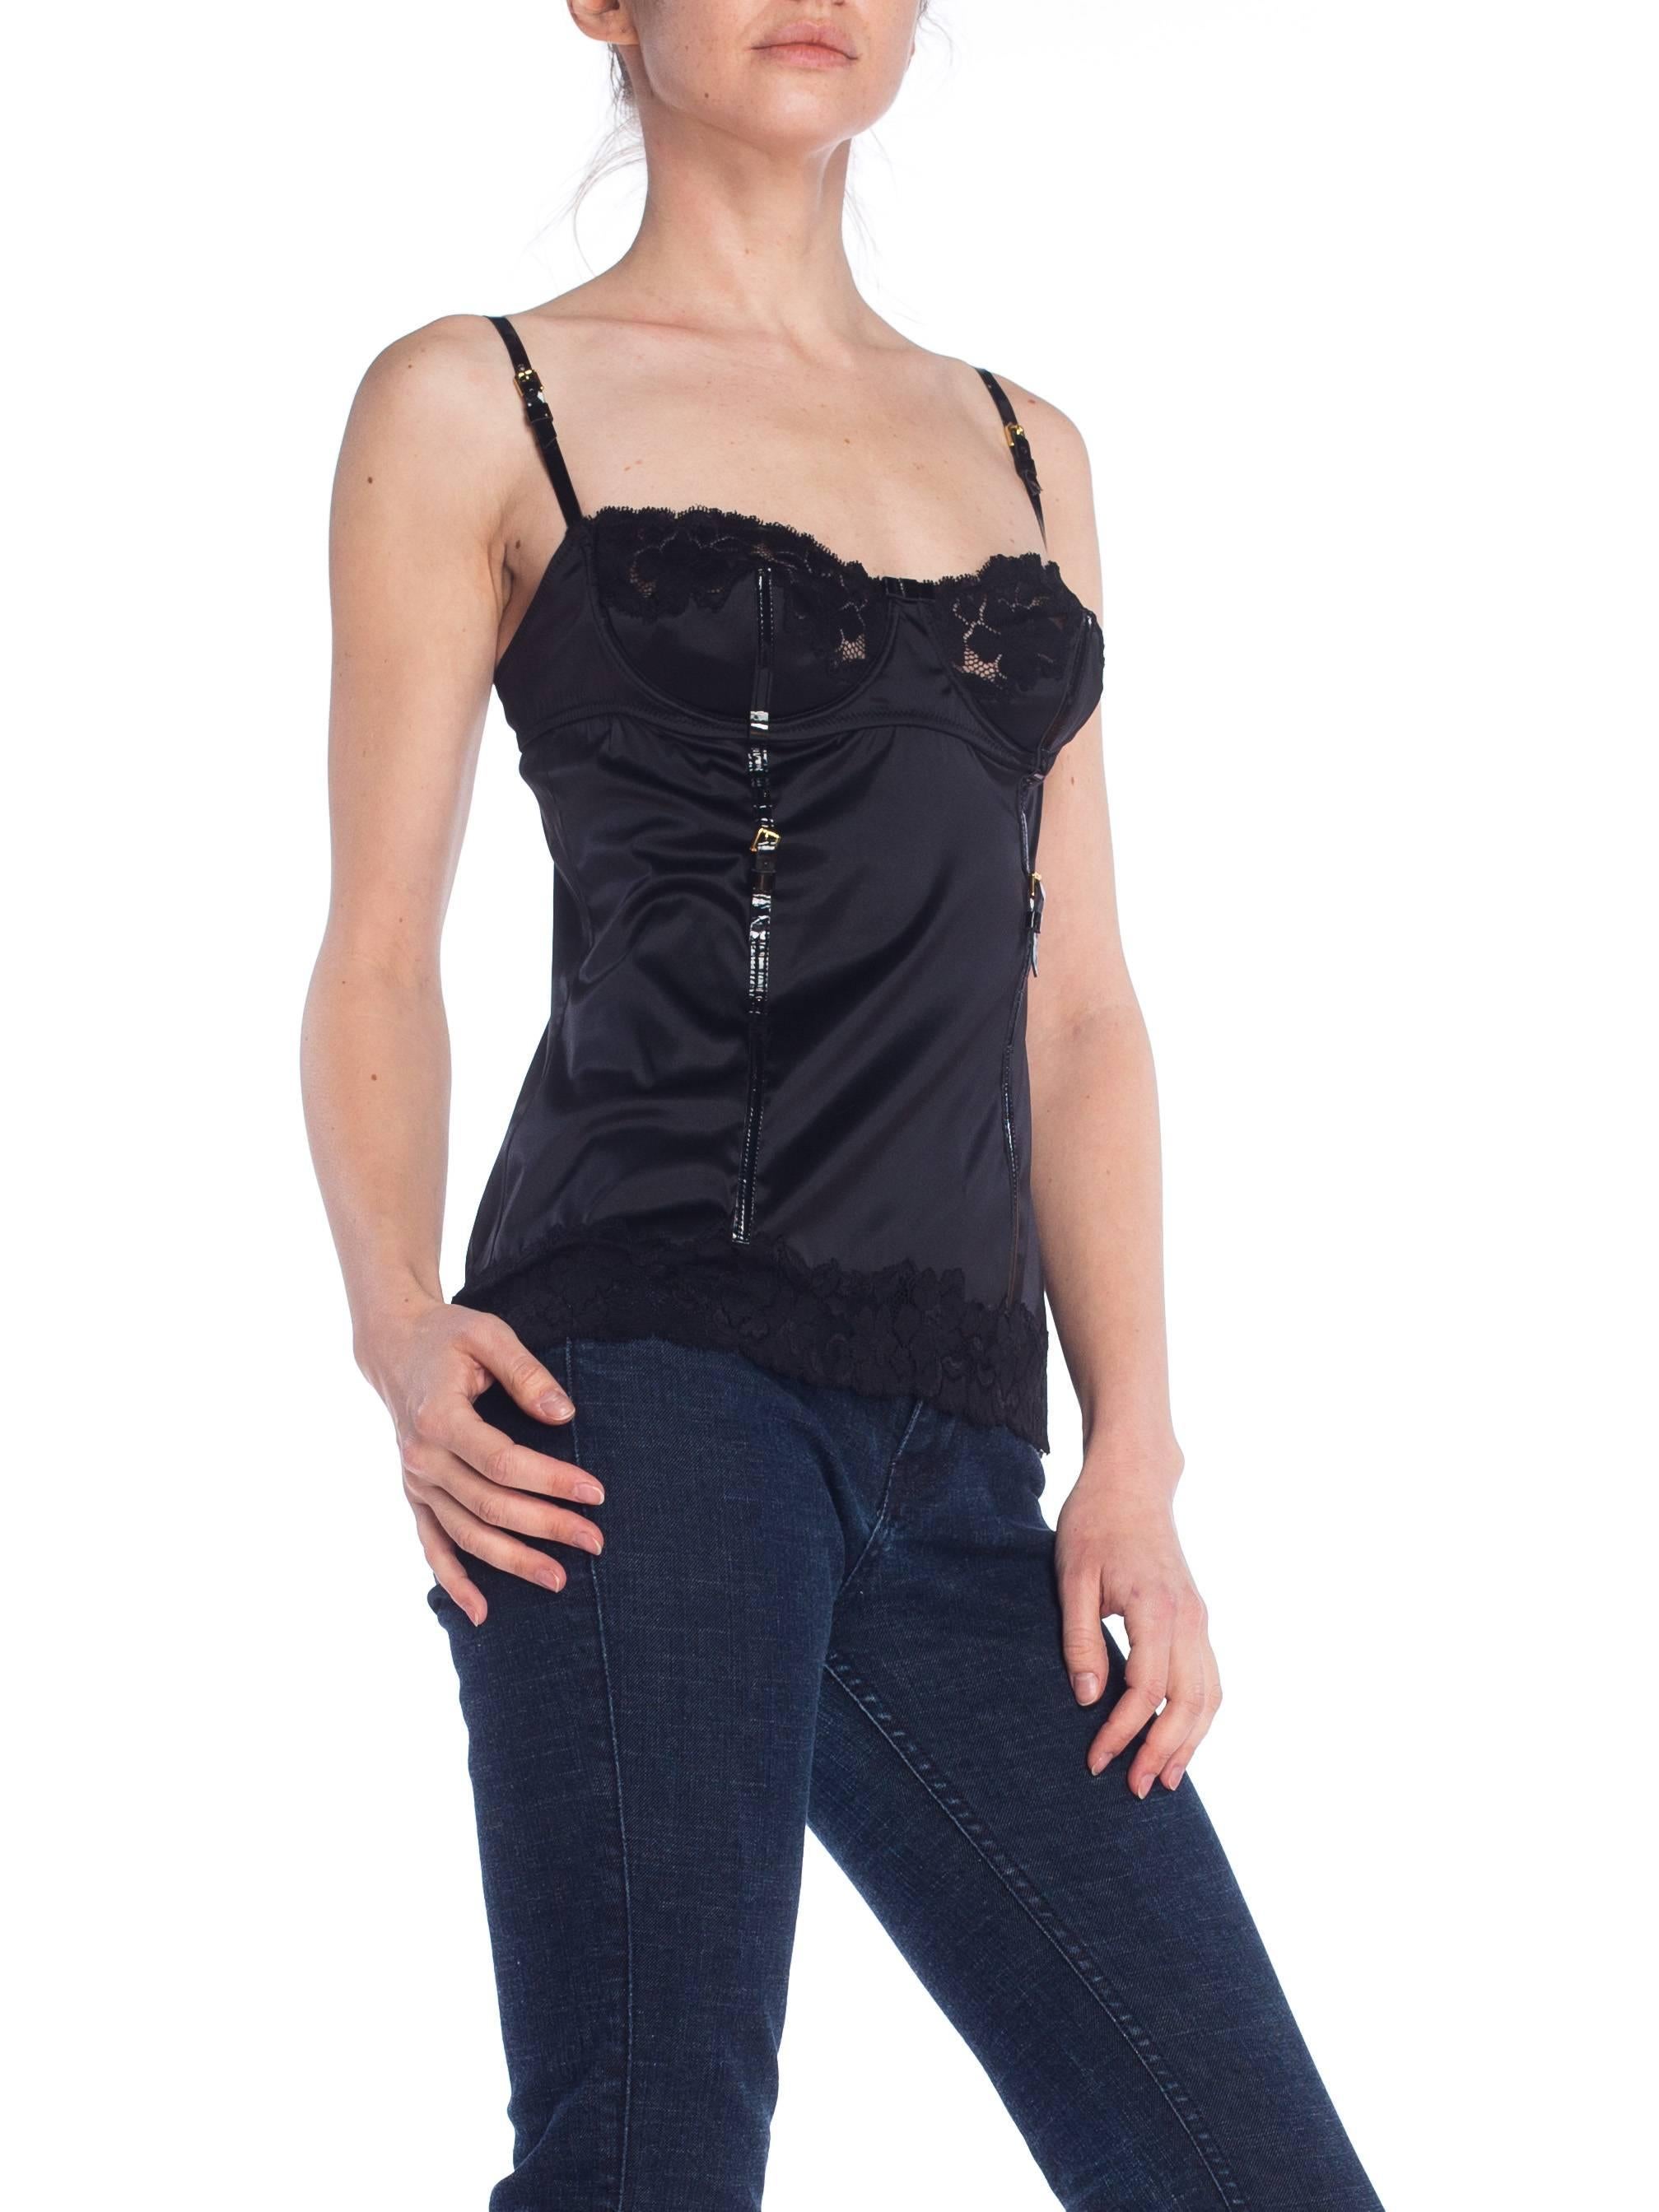 Dolce & Gabbana Silk Cami with Patent Leather and Lace Details 1